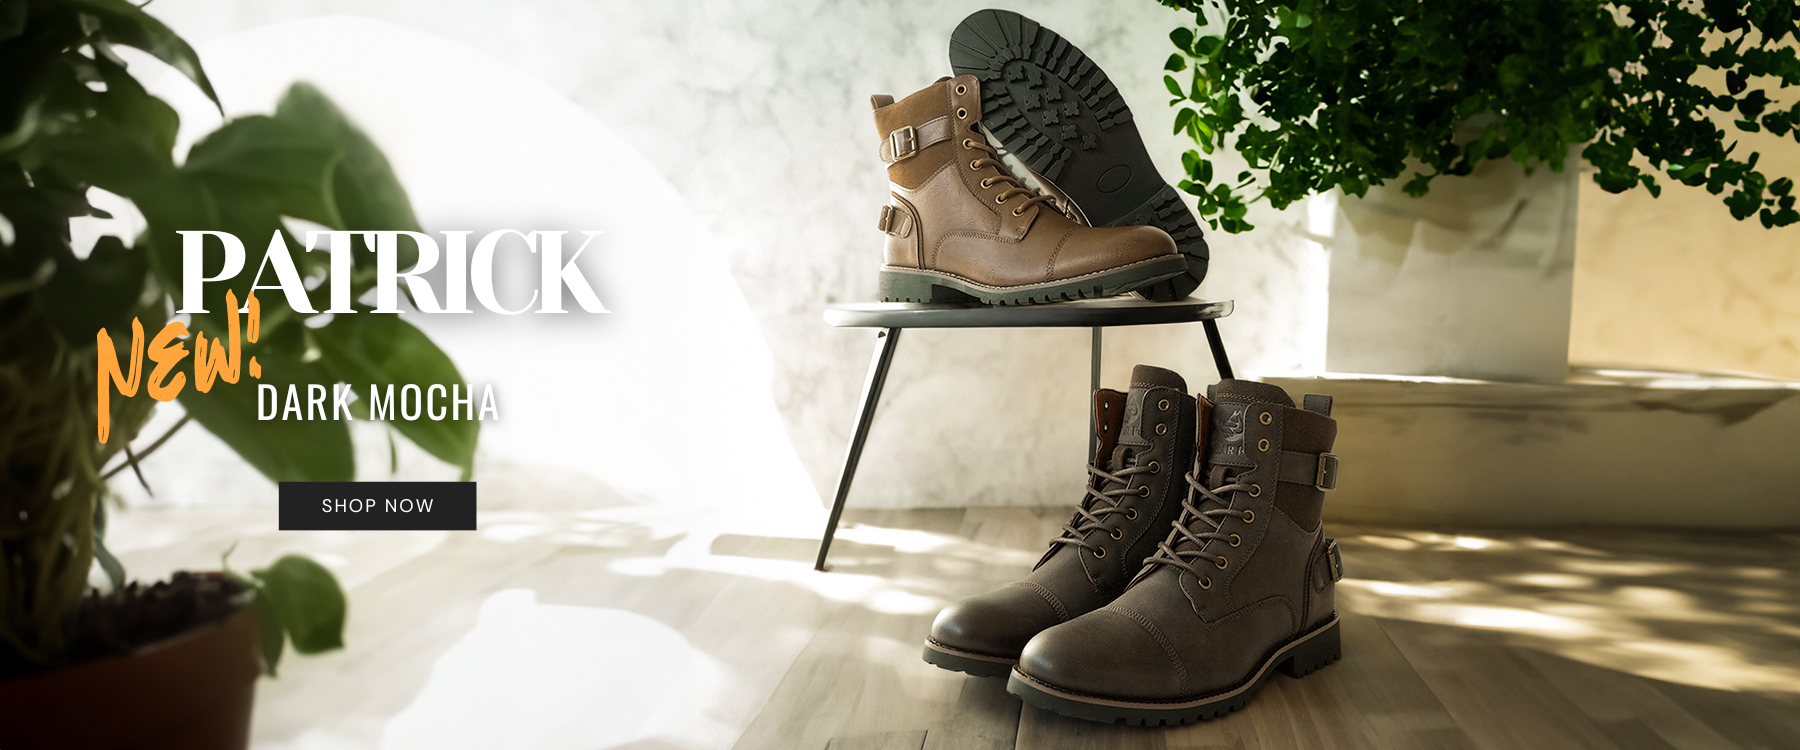 New Arrivals | Classic Combat Boot Patrick | New Color | Hot Sellers | Easy & Comfortable Fit with Memory Foam | Conal Footwear